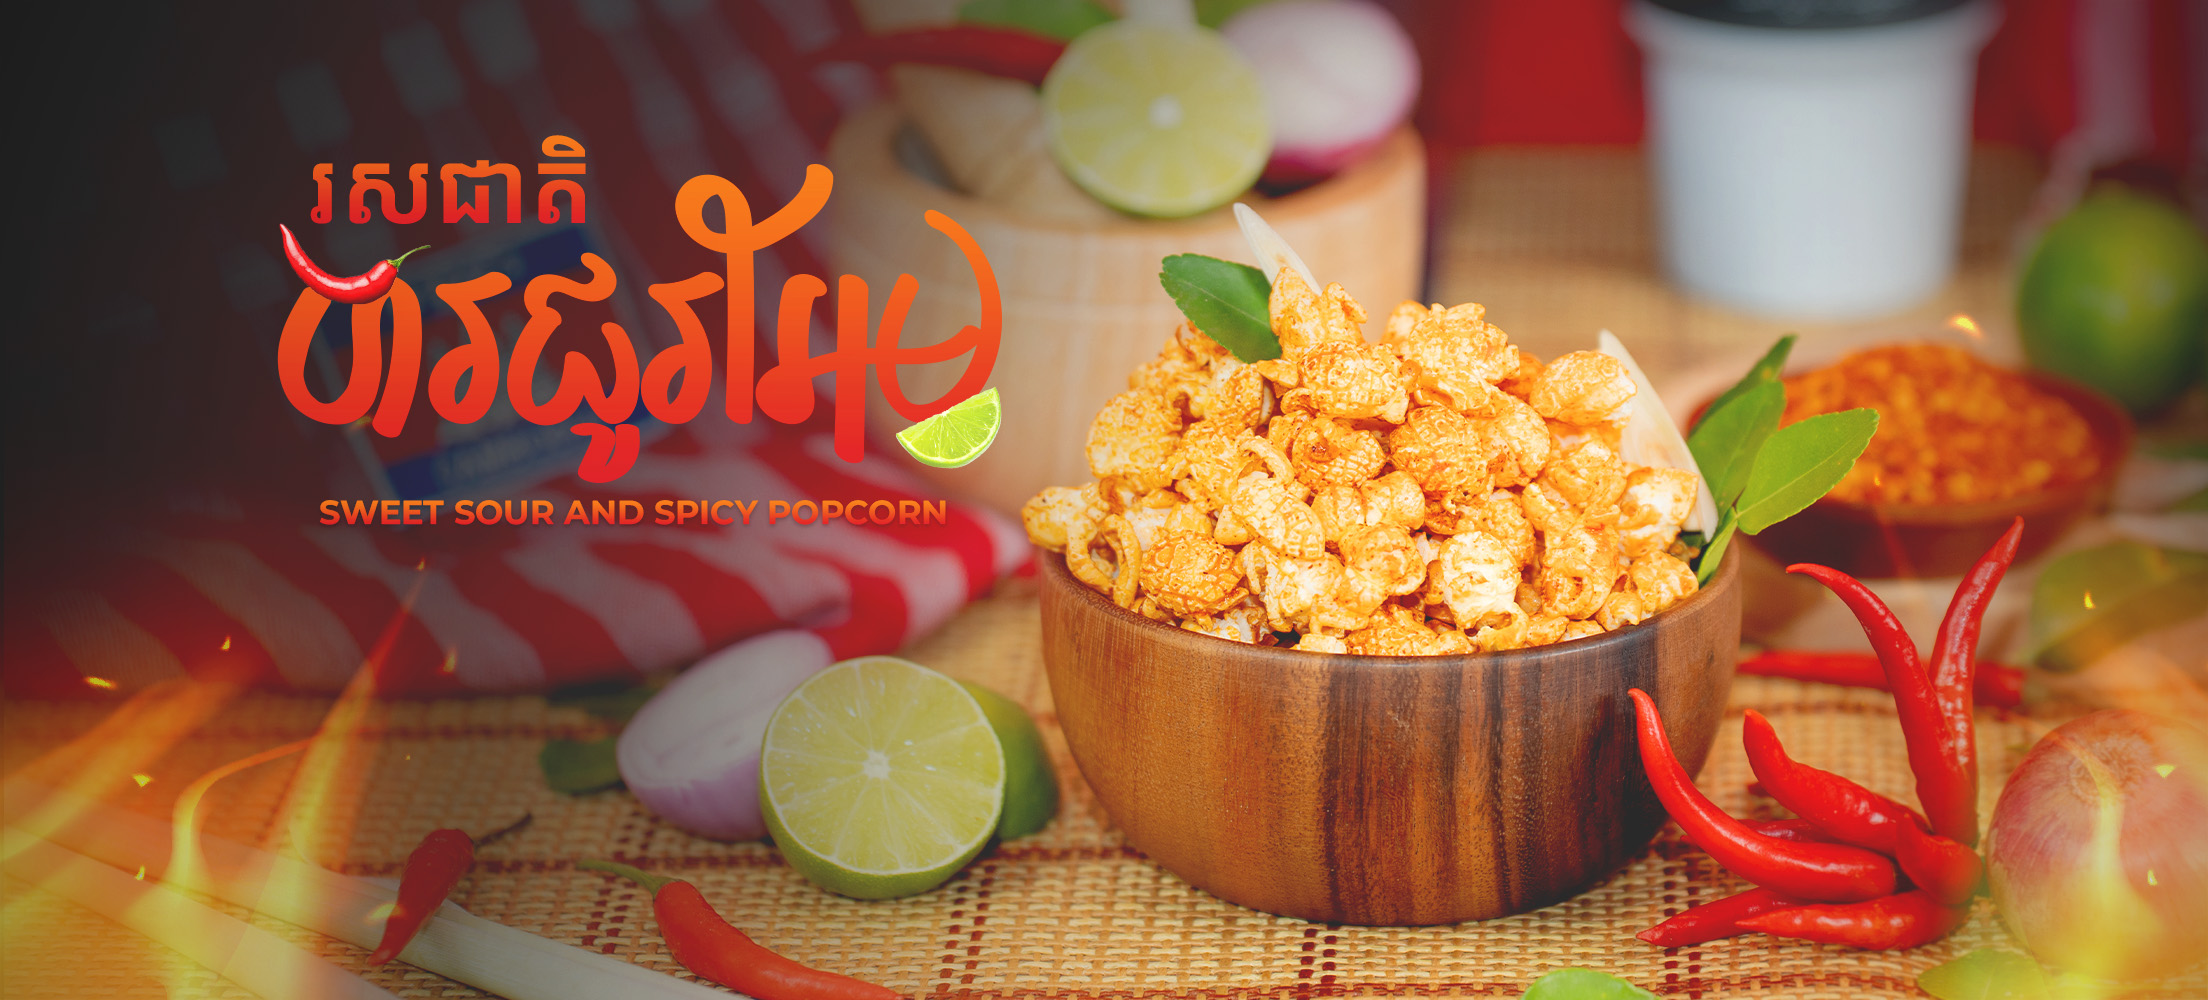 Sweet Sour and Spicy Popcorn(Web Banner).jpg